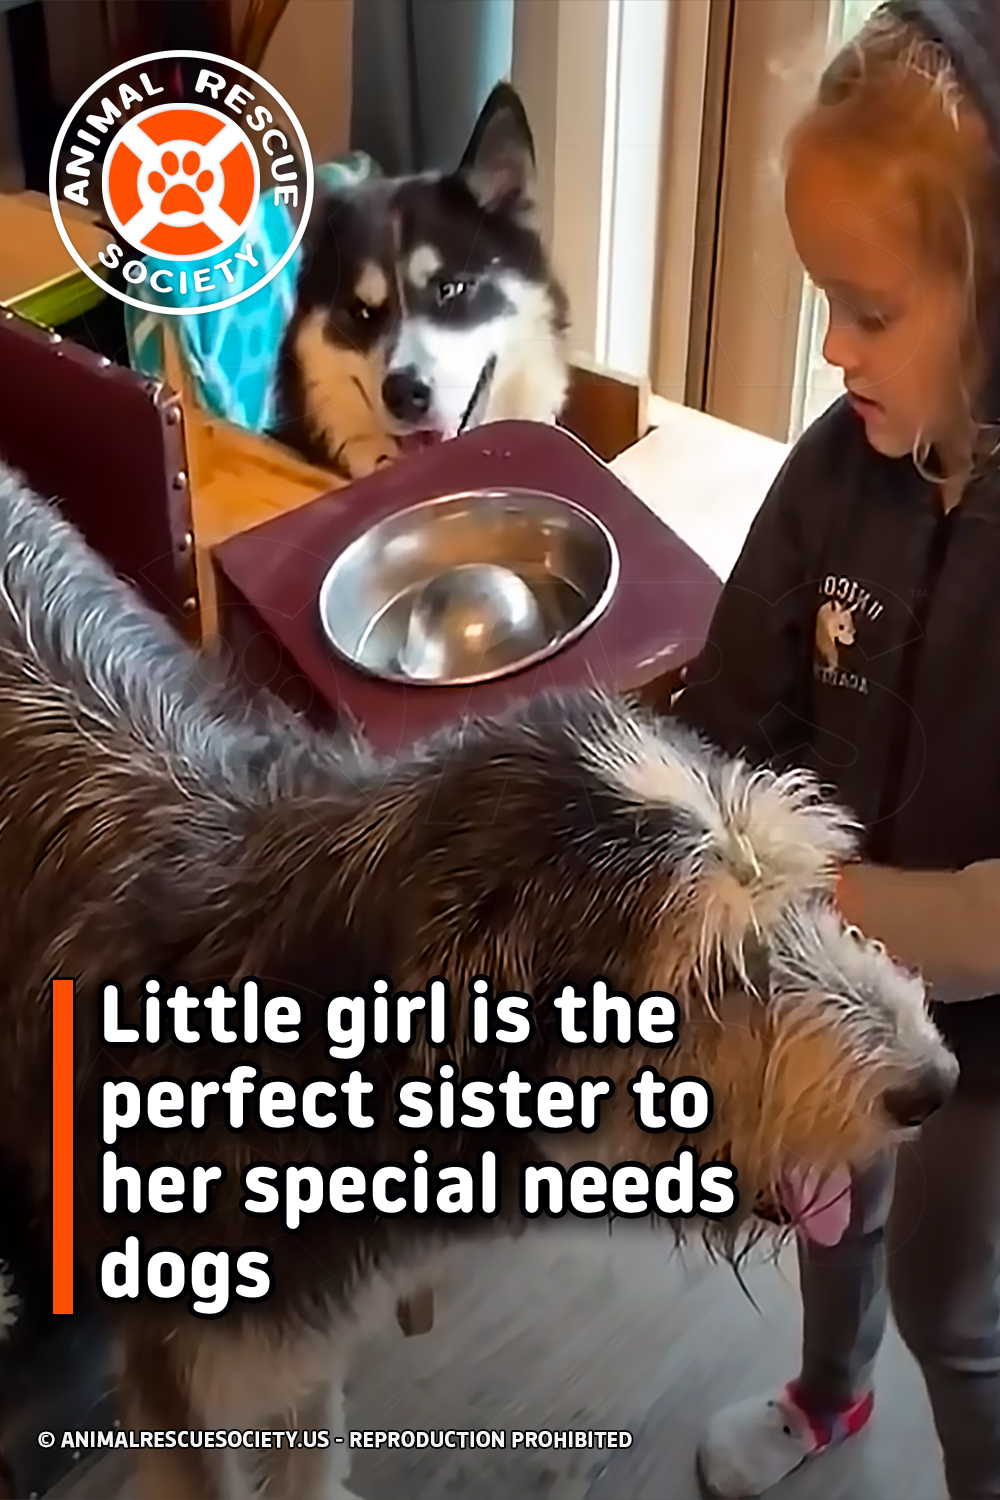 Little girl is the perfect sister to her special needs dogs